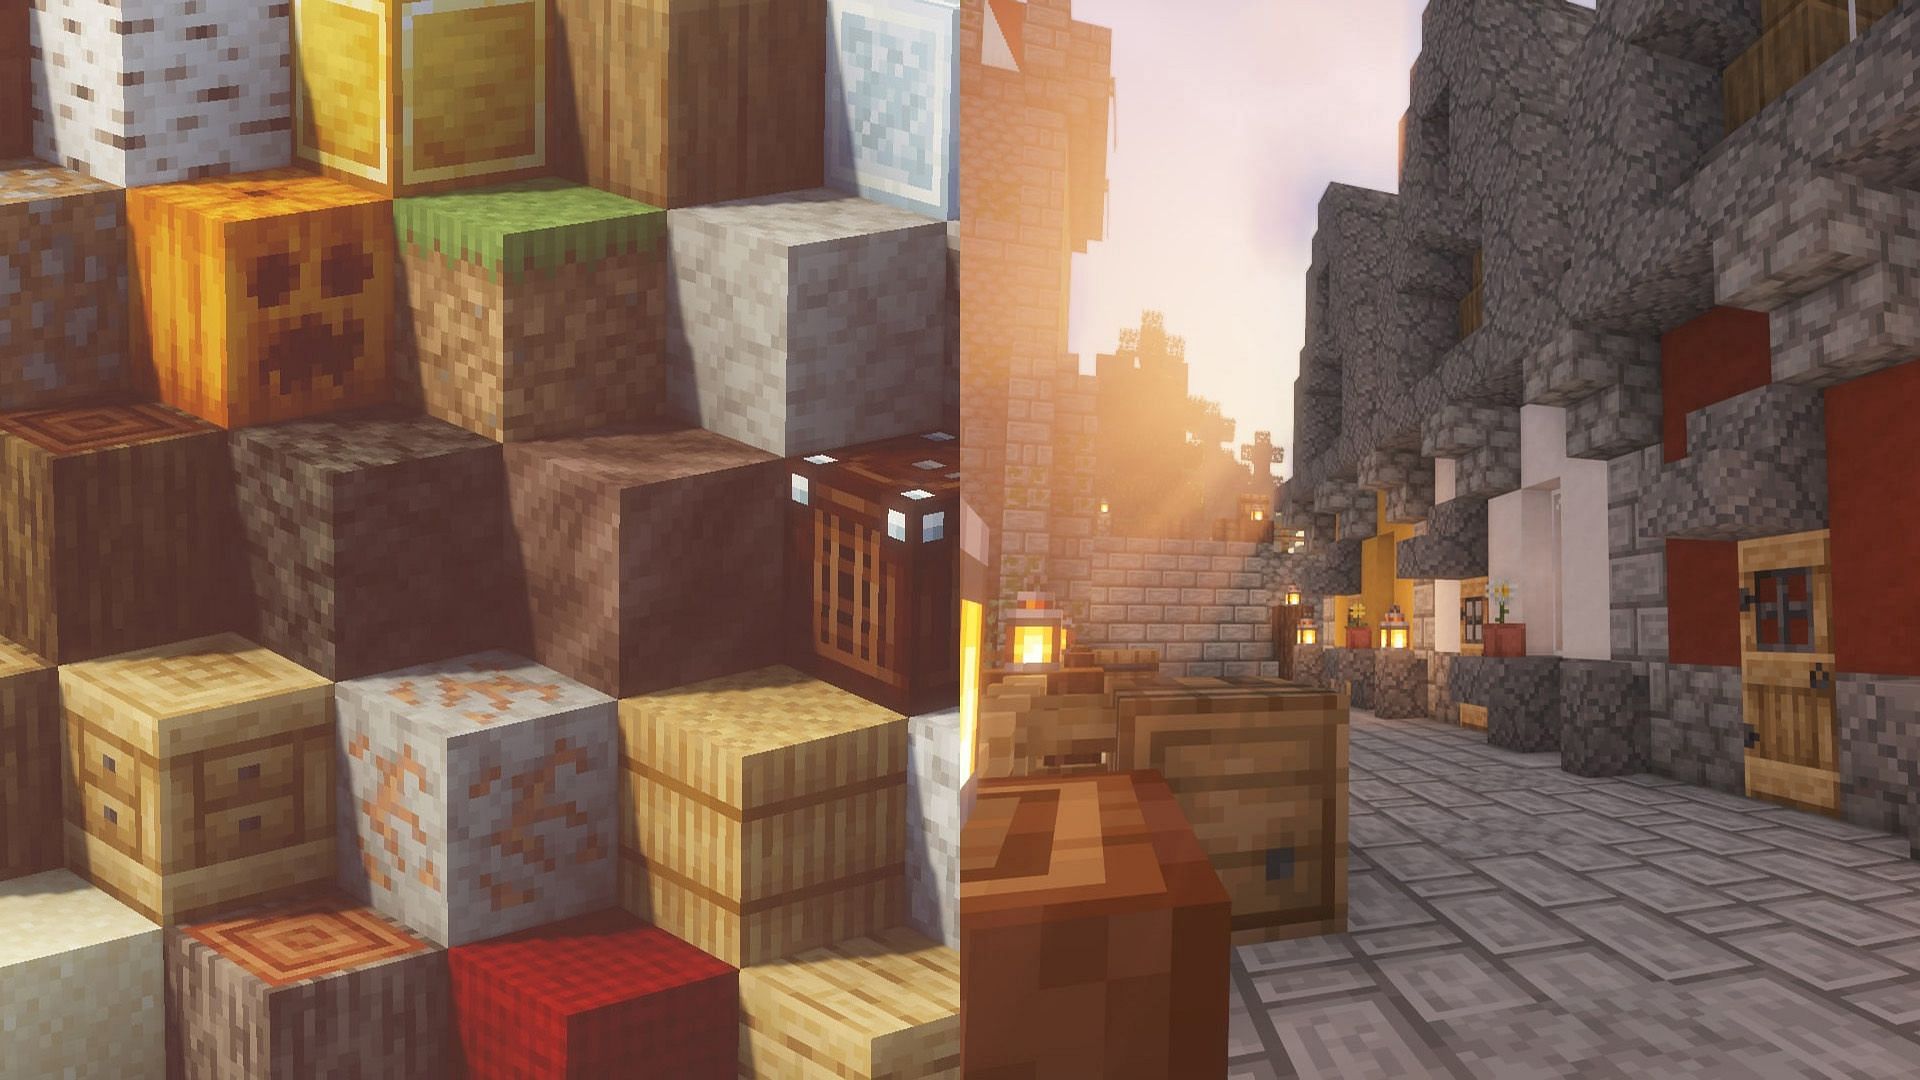 Old Lighting & Water - Minecraft Resource Packs - CurseForge